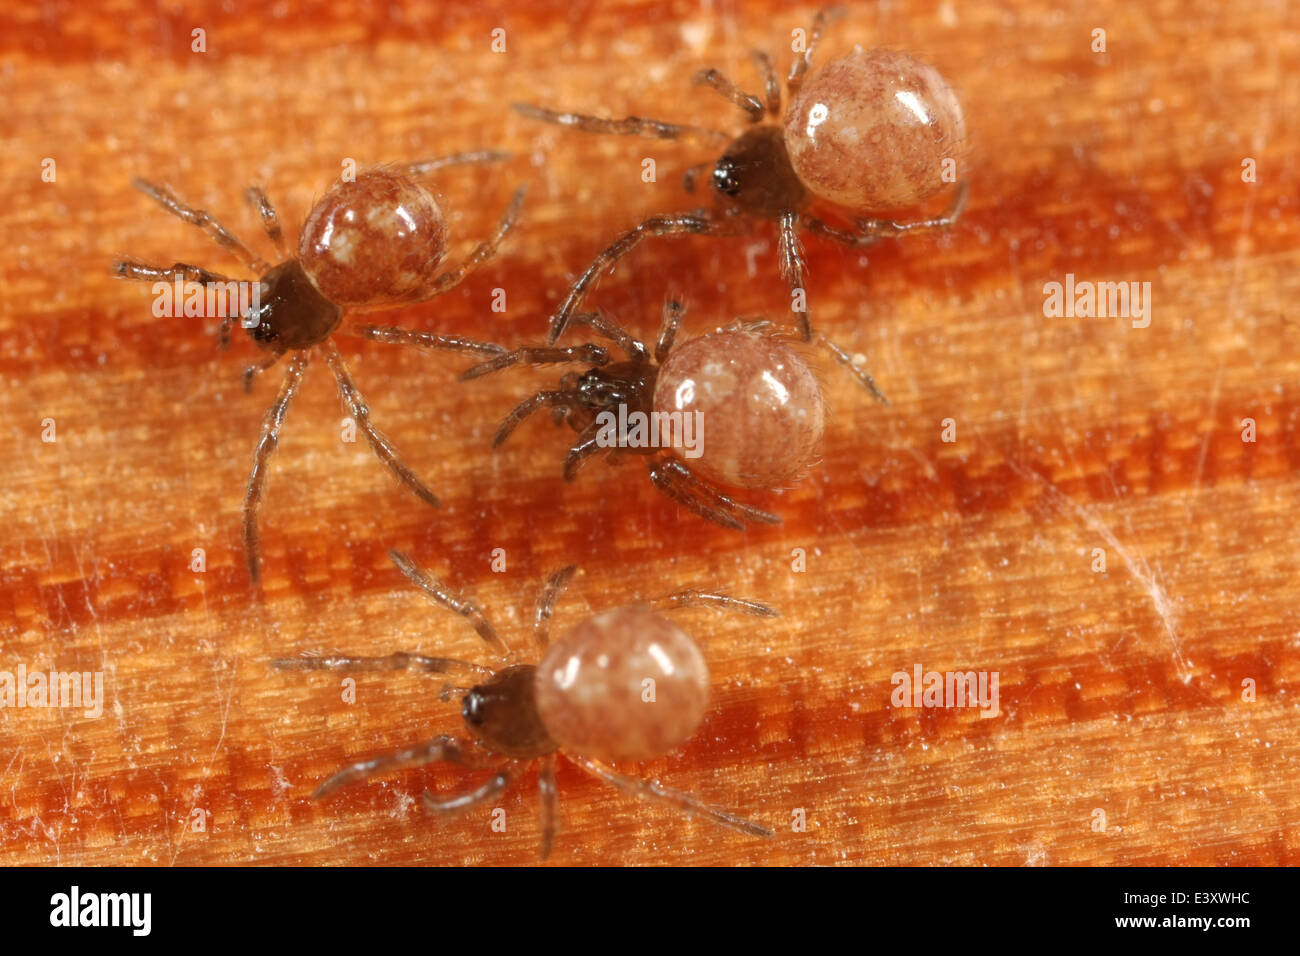 Steatoda bipunctata (Common false-widow) spiderlings, part of the family Theridiidae. Stock Photo